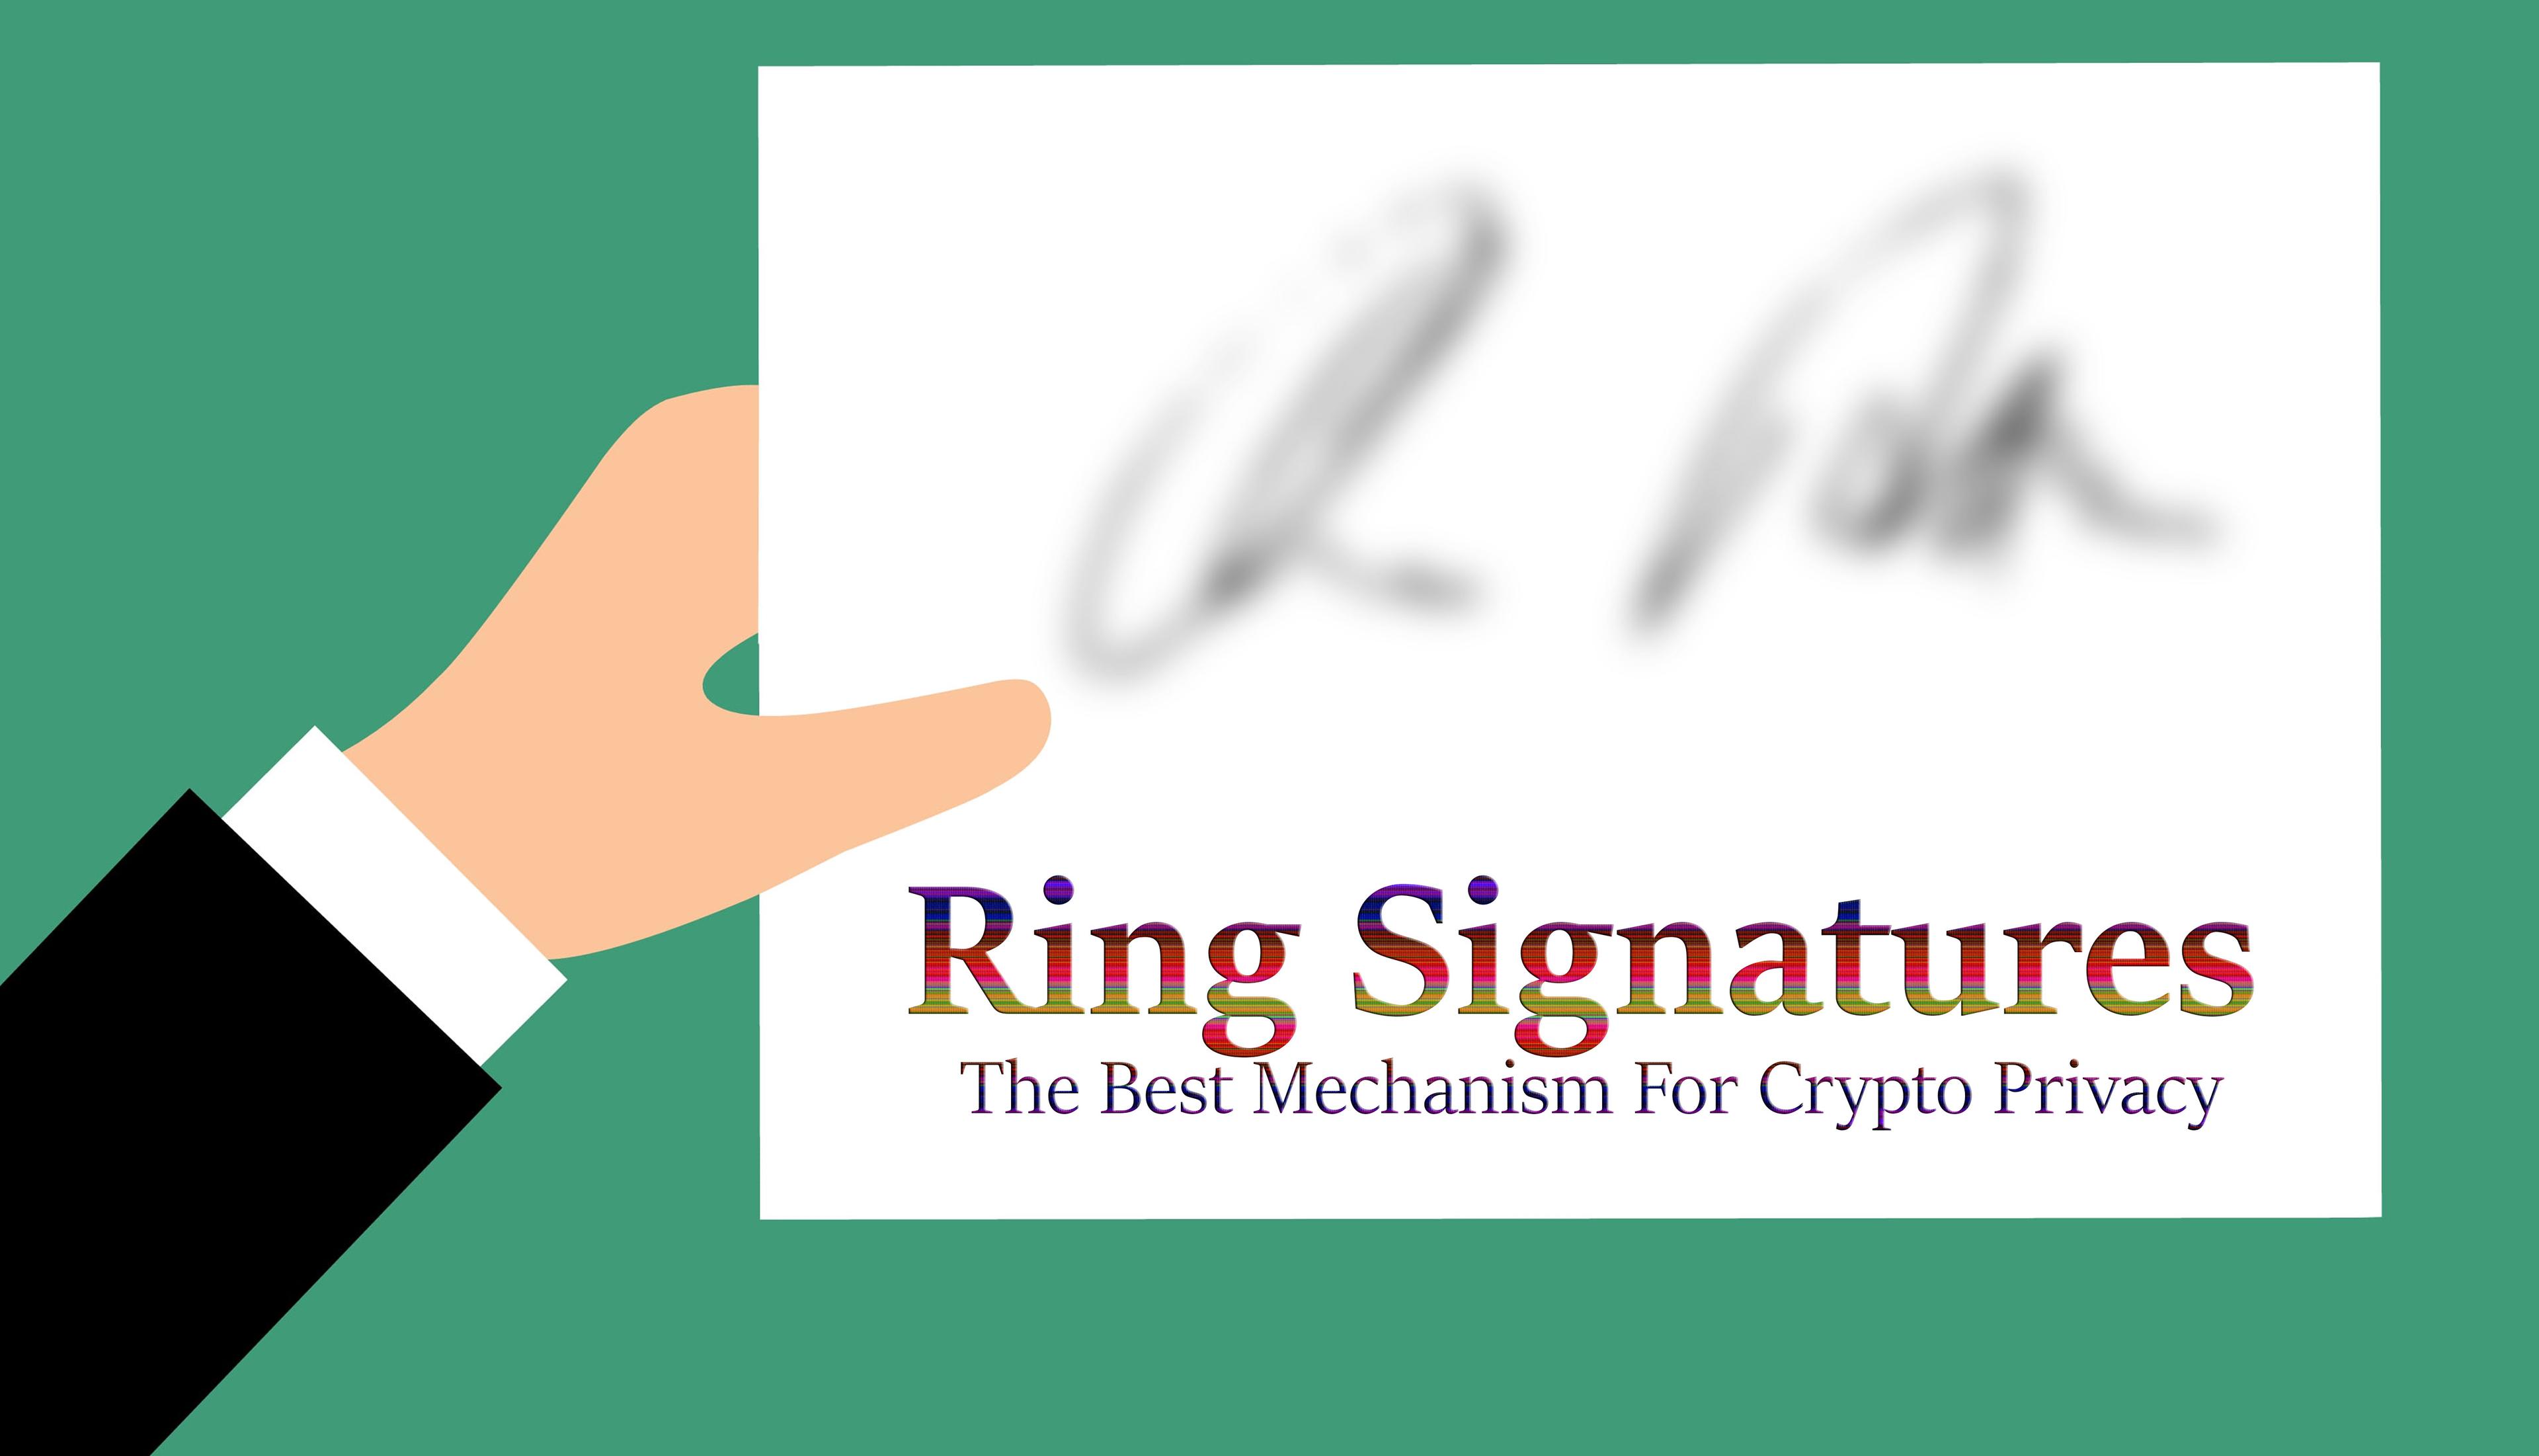 Ring Signatures: The Best Mechanism For Crypto Privacy